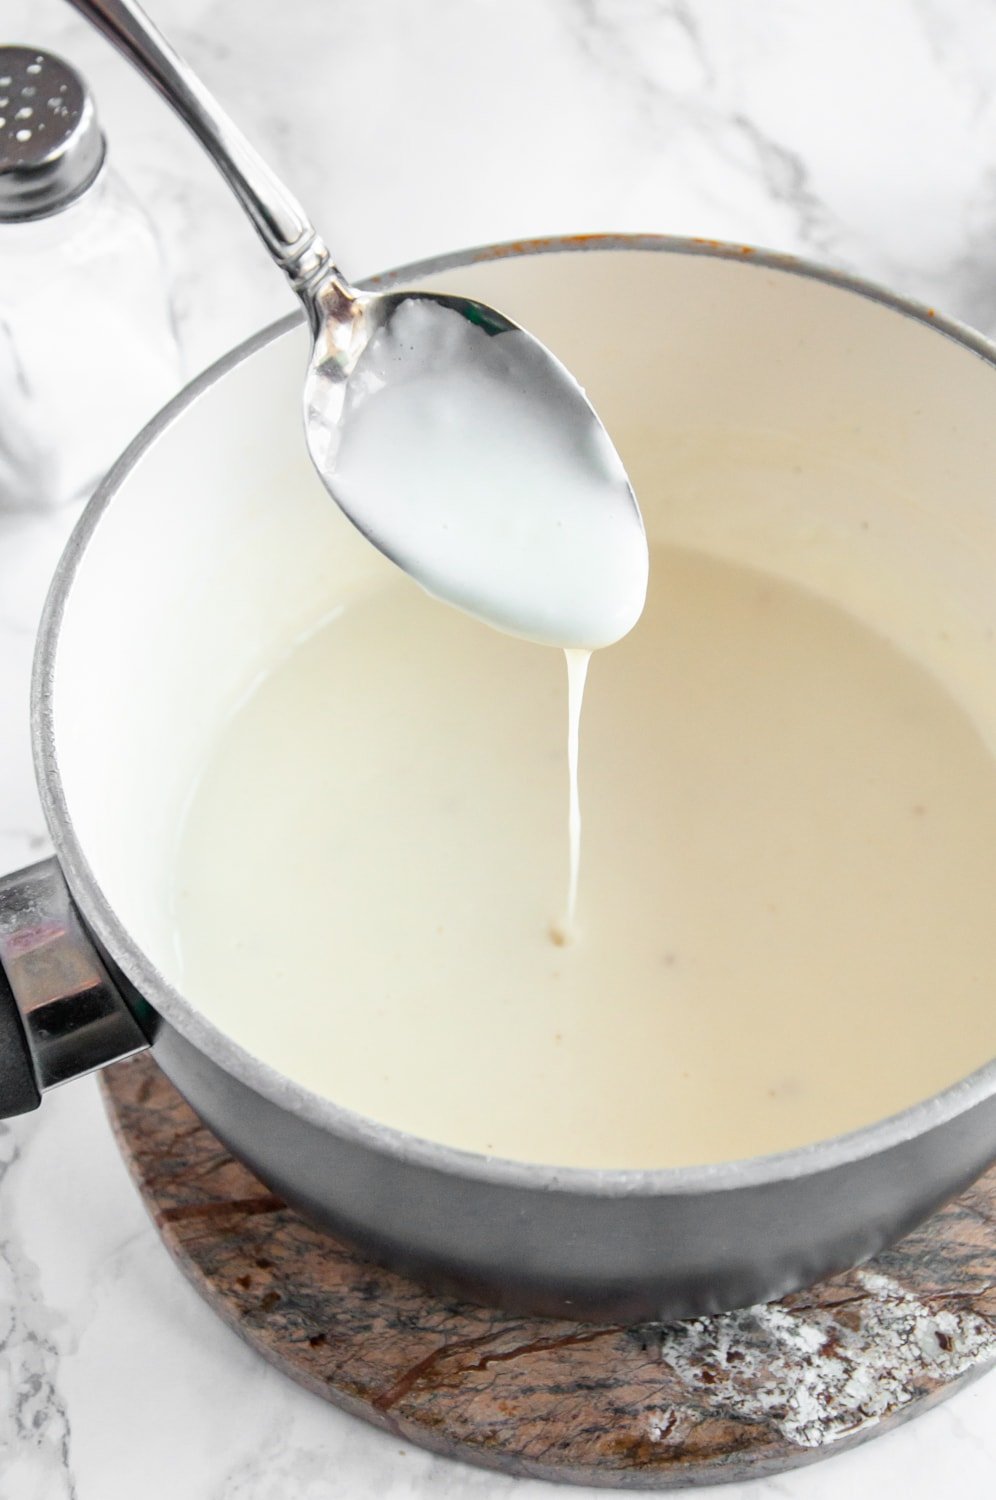 Bechamel sauce in a cooking pot with a spoon scooping some of the sauce out